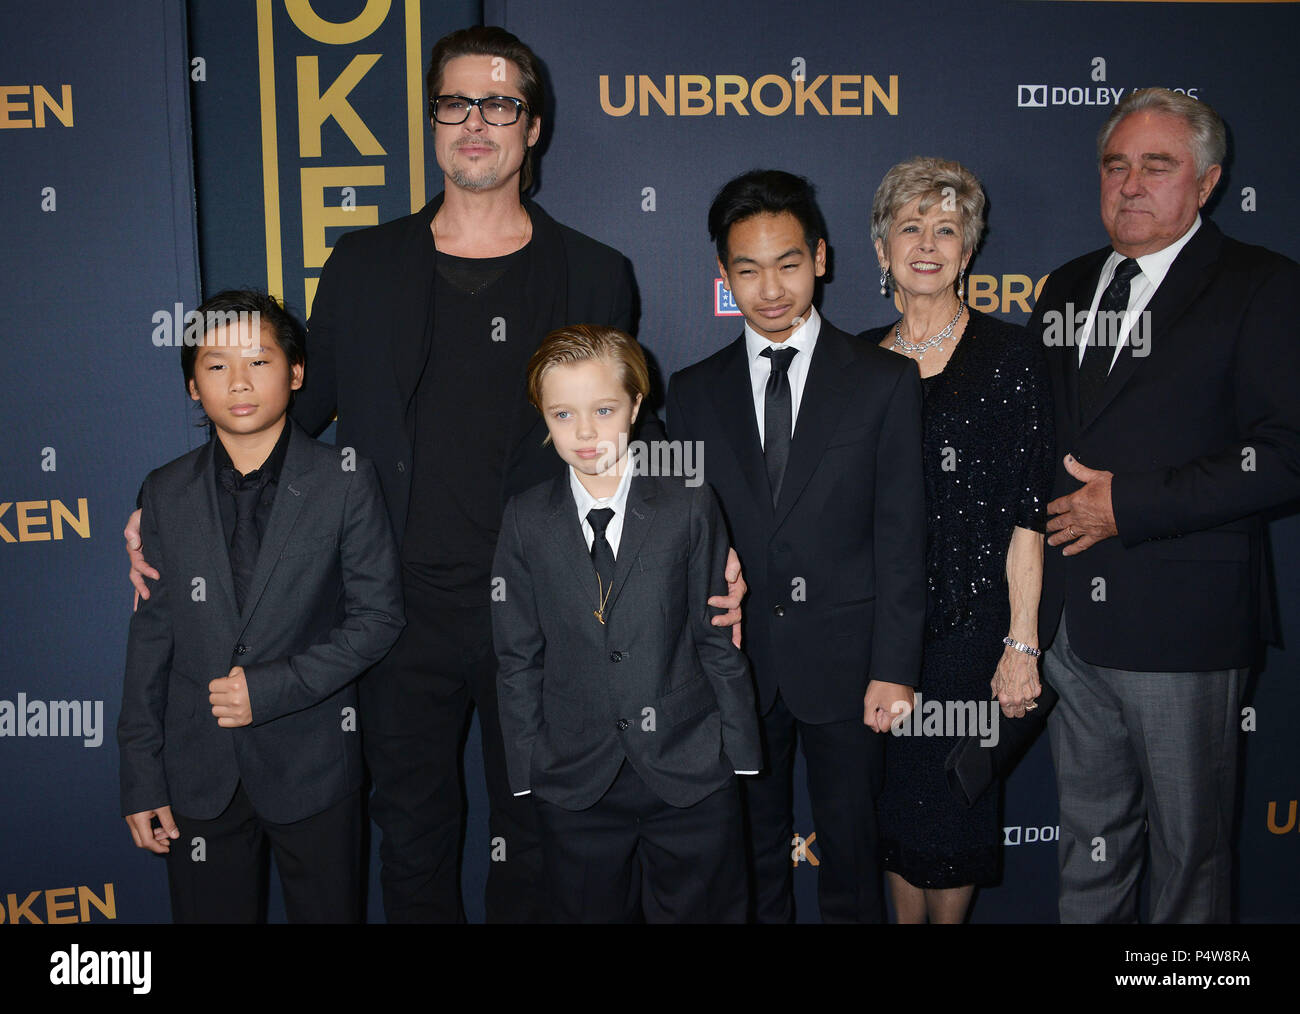 Brad Pitt, (L-R) Pax Thien Jolie-Pitt, Shiloh Nouvel Jolie-Pitt,, Maddox Jolie-Pitt, Jane Pitt, and William Pitt 046  at the Unbroken Premiere at the Dolby Theatre in Los Angeles. Dec. 14, 2014Brad Pitt, (L-R) Pax Thien Jolie-Pitt, Shiloh Nouvel Jolie-Pitt,, Maddox Jolie-Pitt, Jane Pitt, and William Pitt 046 ------------- Red Carpet Event, Vertical, USA, Film Industry, Celebrities,  Photography, Bestof, Arts Culture and Entertainment, Topix Celebrities fashion /  Vertical, Best of, Event in Hollywood Life - California,  Red Carpet and backstage, USA, Film Industry, Celebrities,  movie celebrit Stock Photo